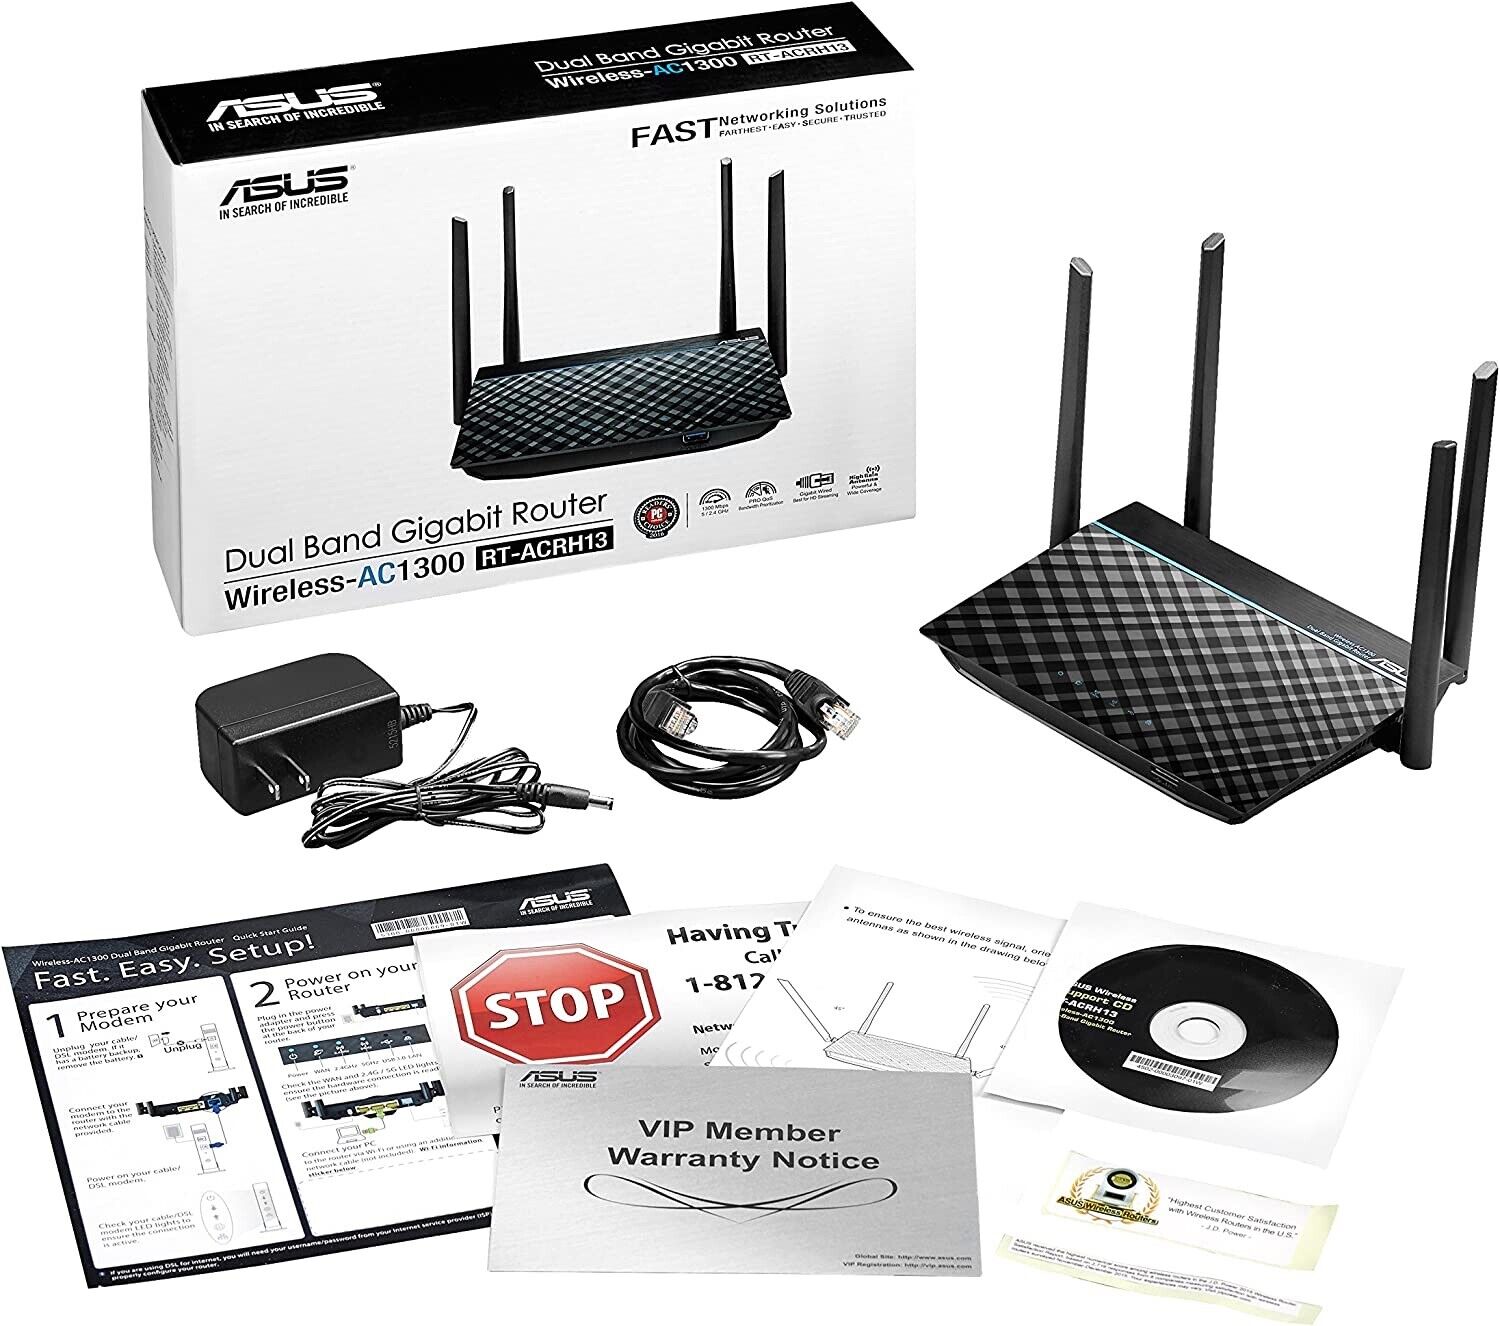 New Sealed Asus RT-ACRH13 AC1300 WiFi Router Dual Band Gigabit Wireless Router